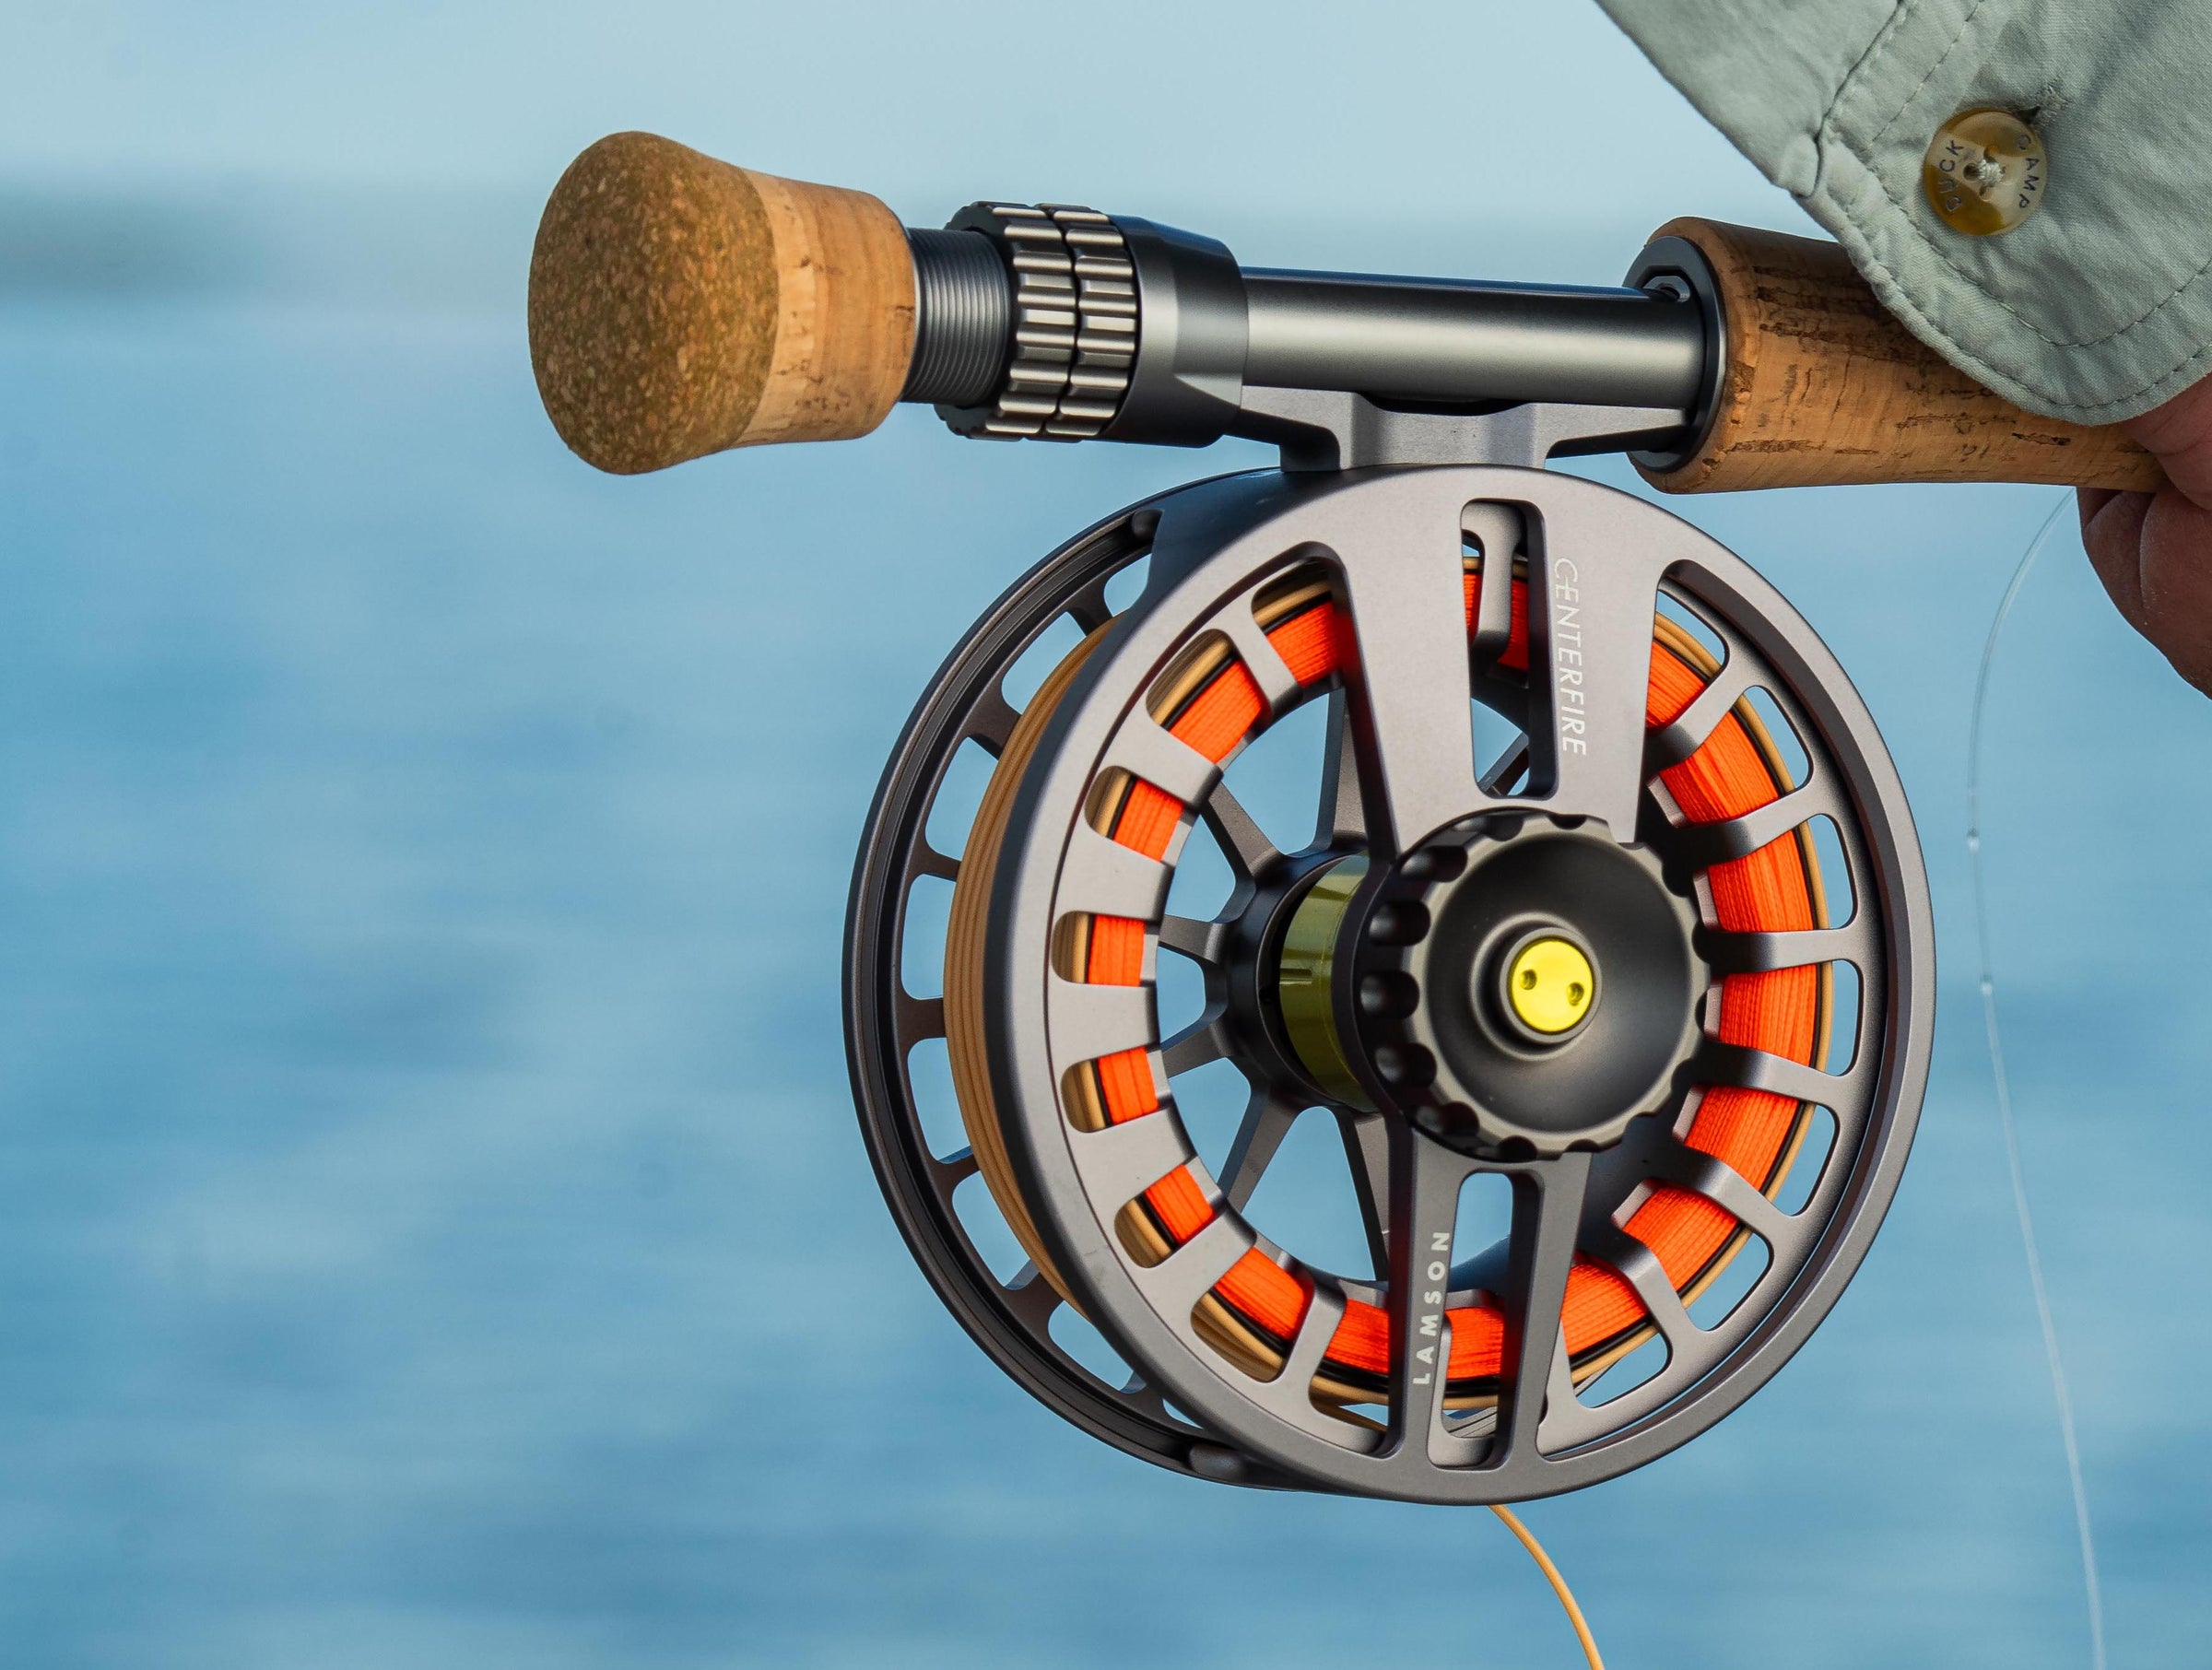 Lamson Centerfire 10 Saltwater Fly Reel - 9-10wt, Factory 2nds - Save 36%